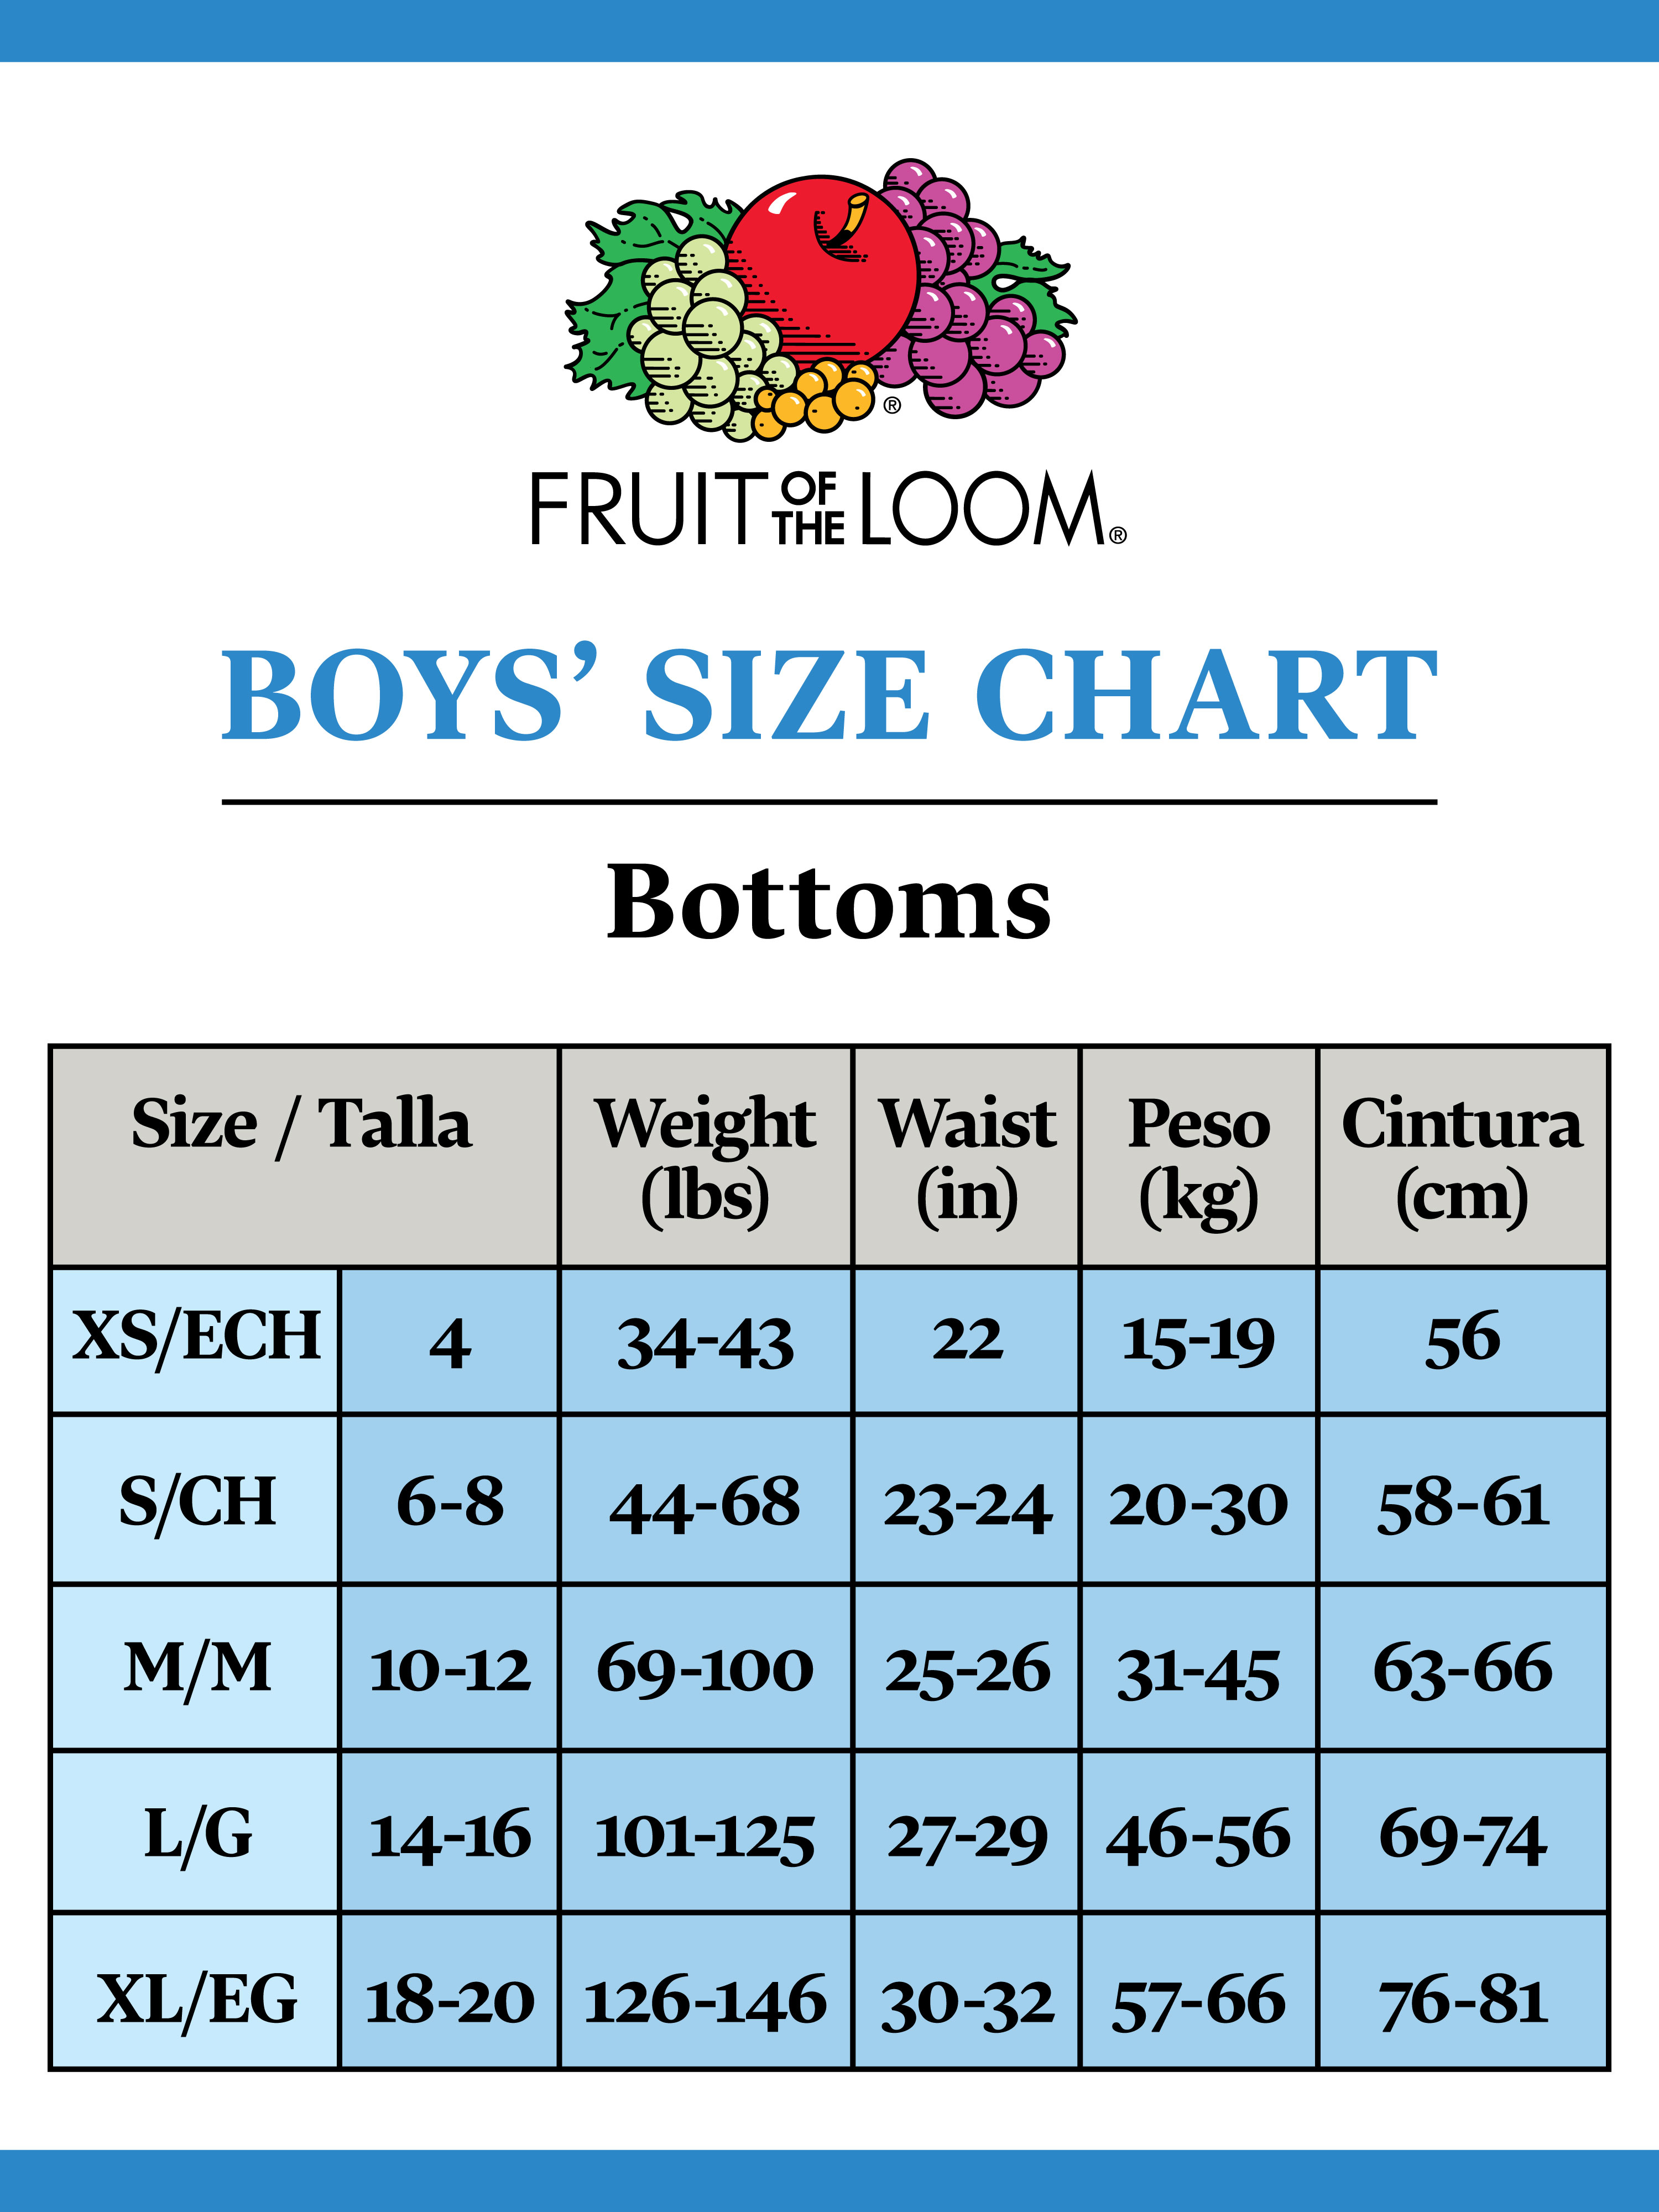 Fruit of the Loom Boys Underwear, 10 Pack Striped Boxer Brief Underwear, Size XL (18/20) - image 5 of 5